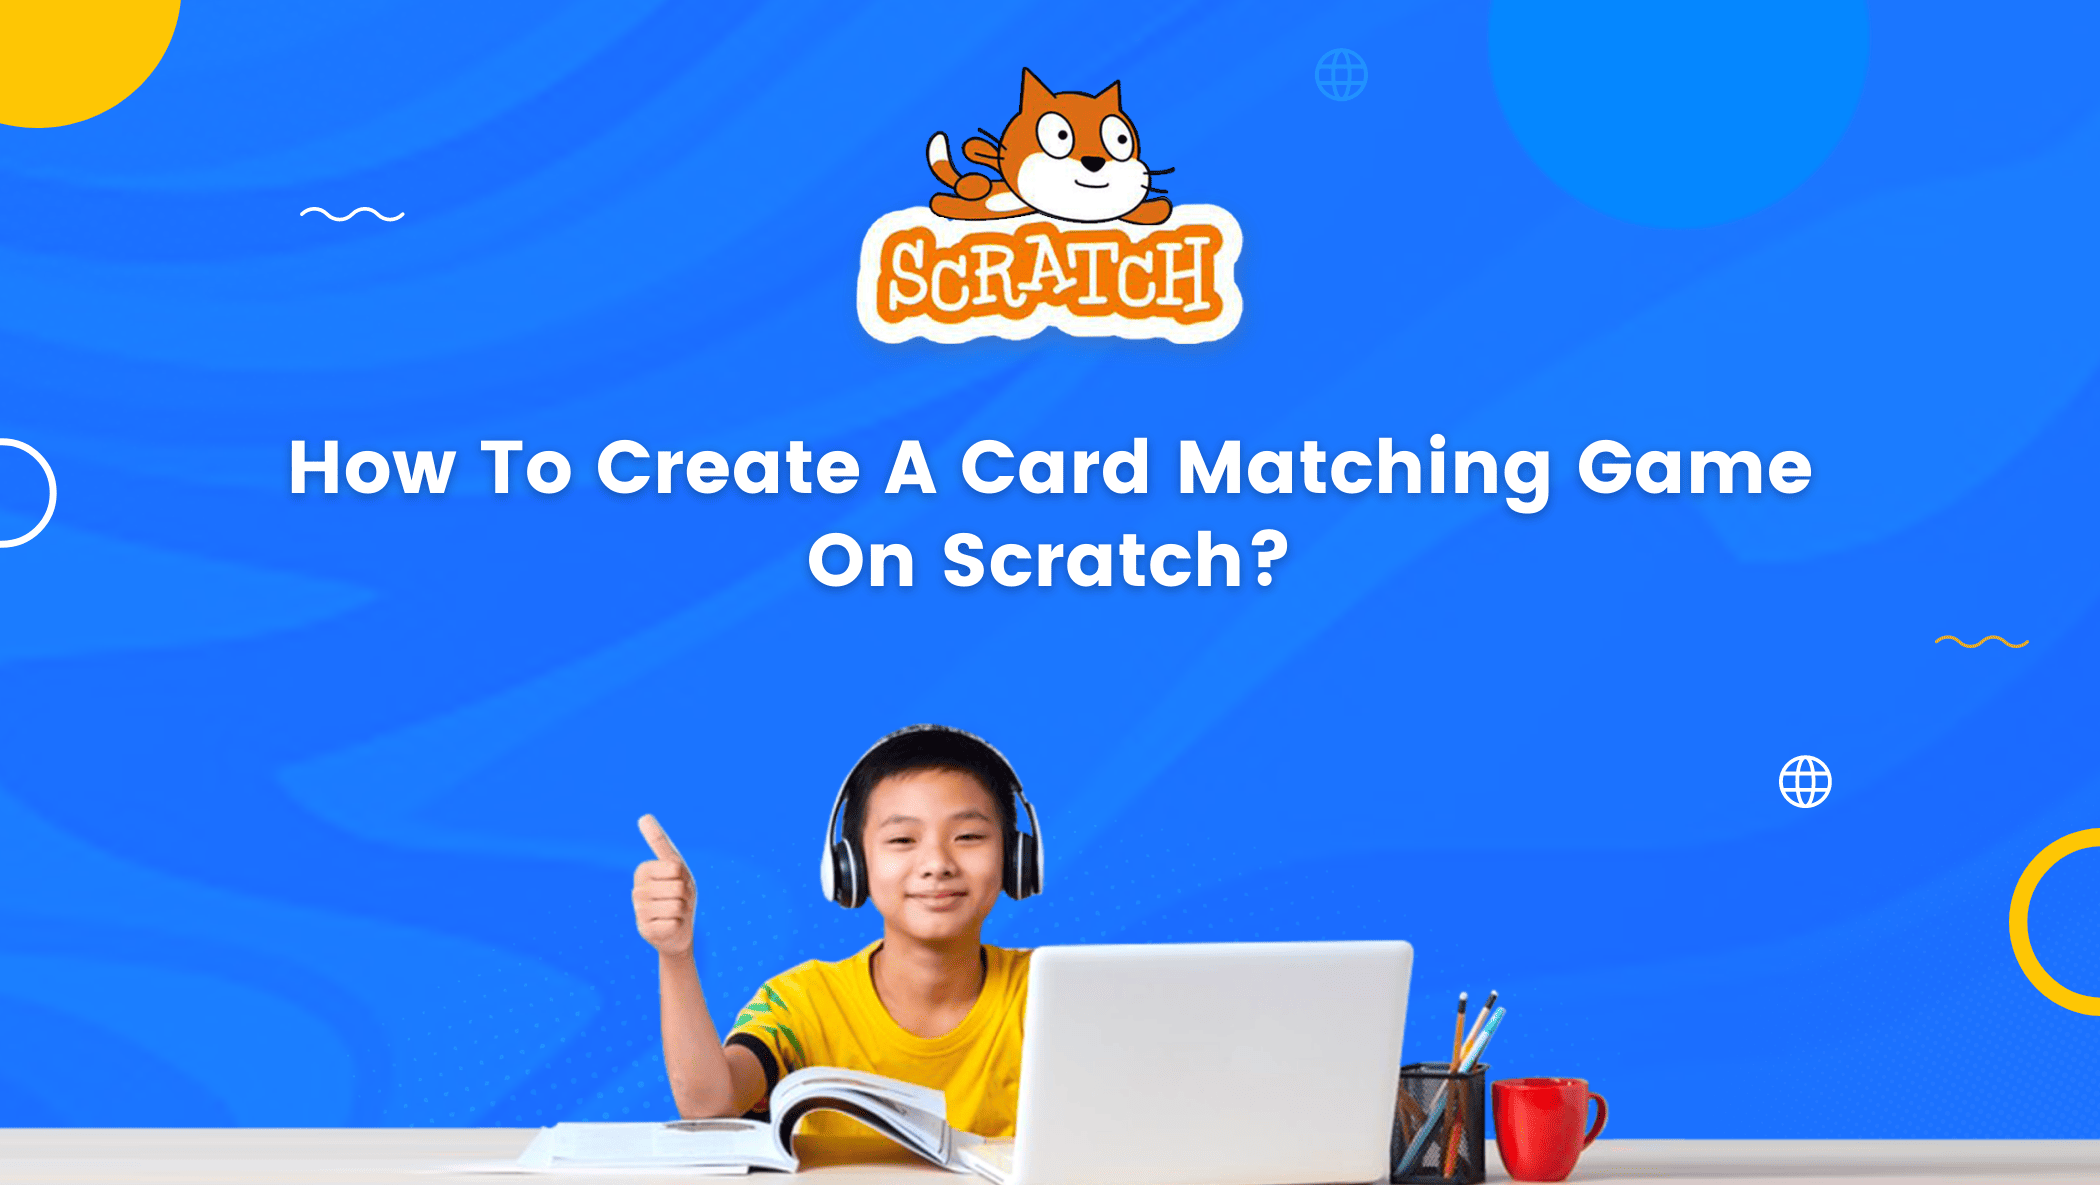 step-by-step-guide-to-create-scratch-game-of-matching-cards-brightchamps-blog